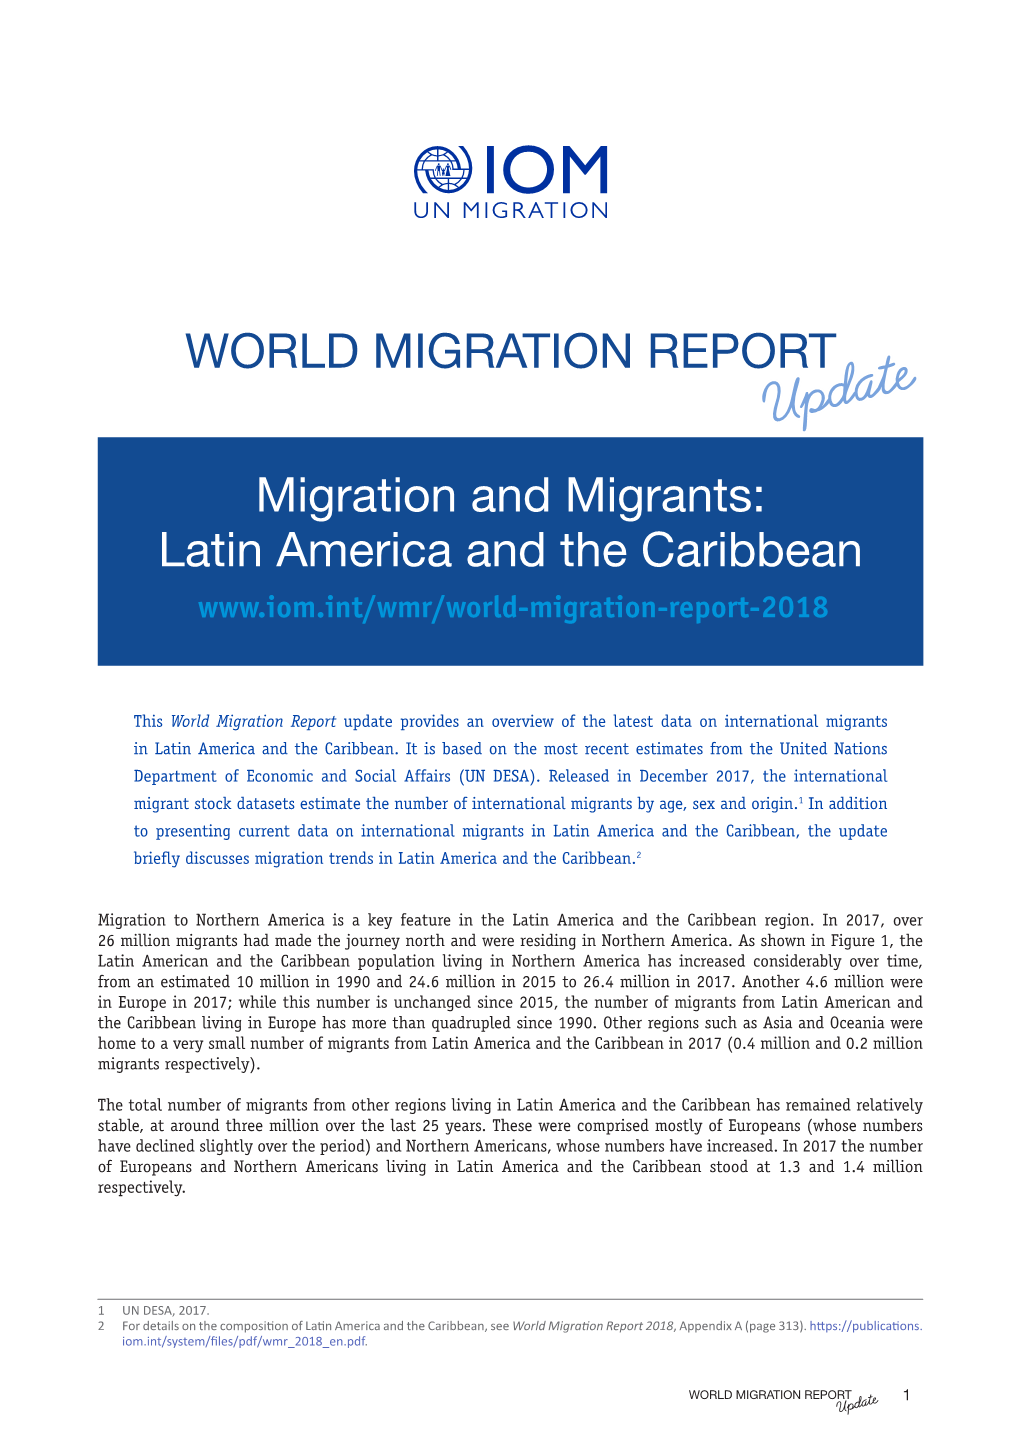 Migration and Migrants: Latin America and the Caribbean